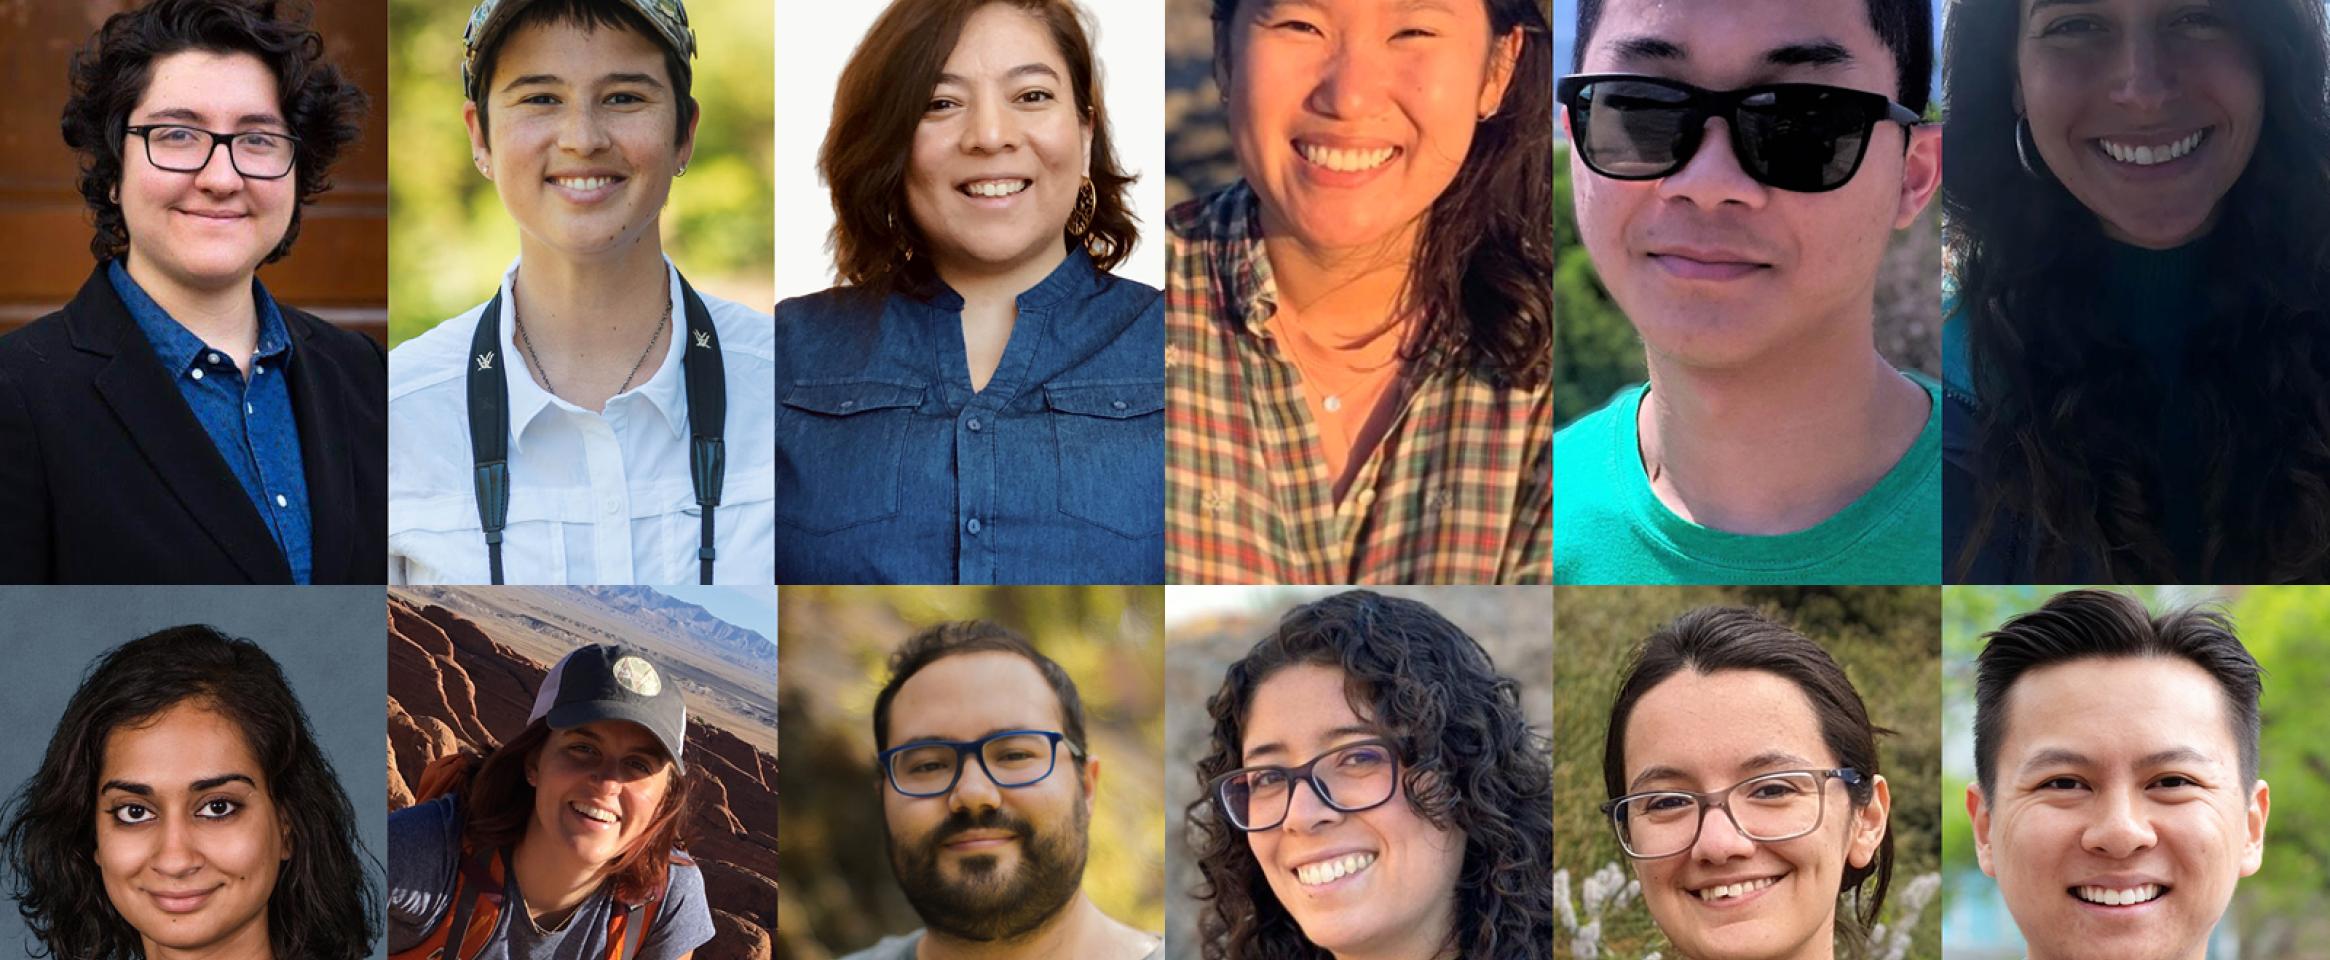 Collage of 12 headshot photos with 4 recent cohorts of N A S W Diversity Summer Fellows, with different genders and hair styles represented.